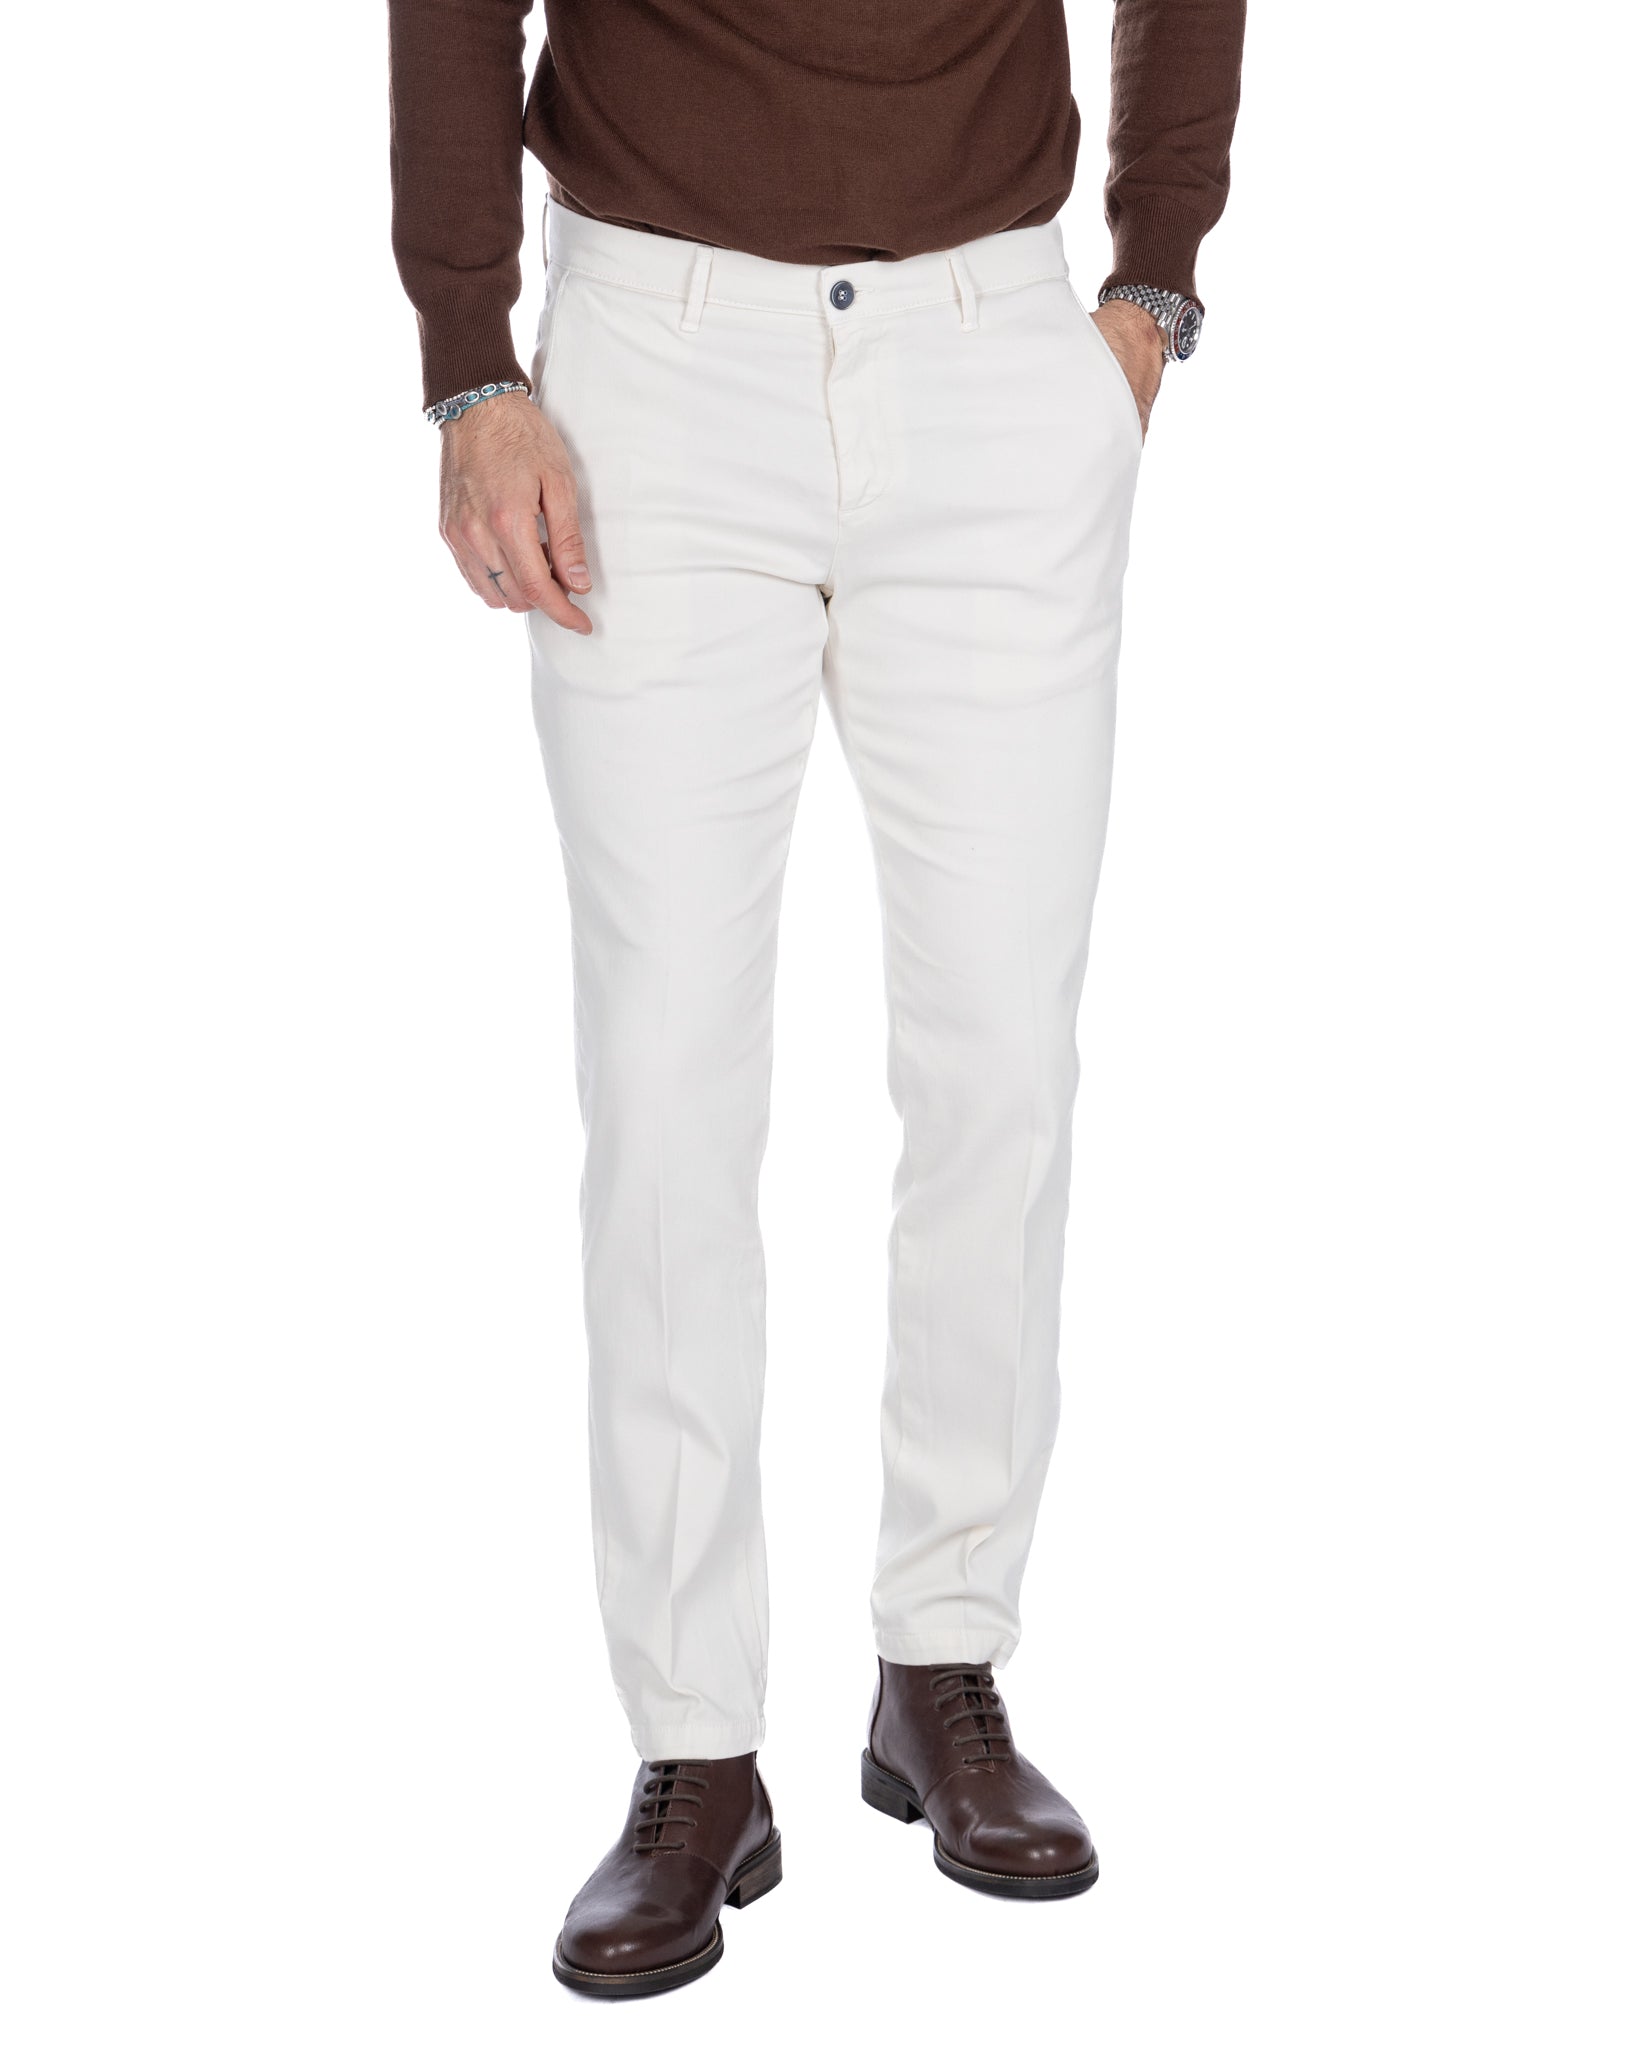 Jack - cream armored trousers